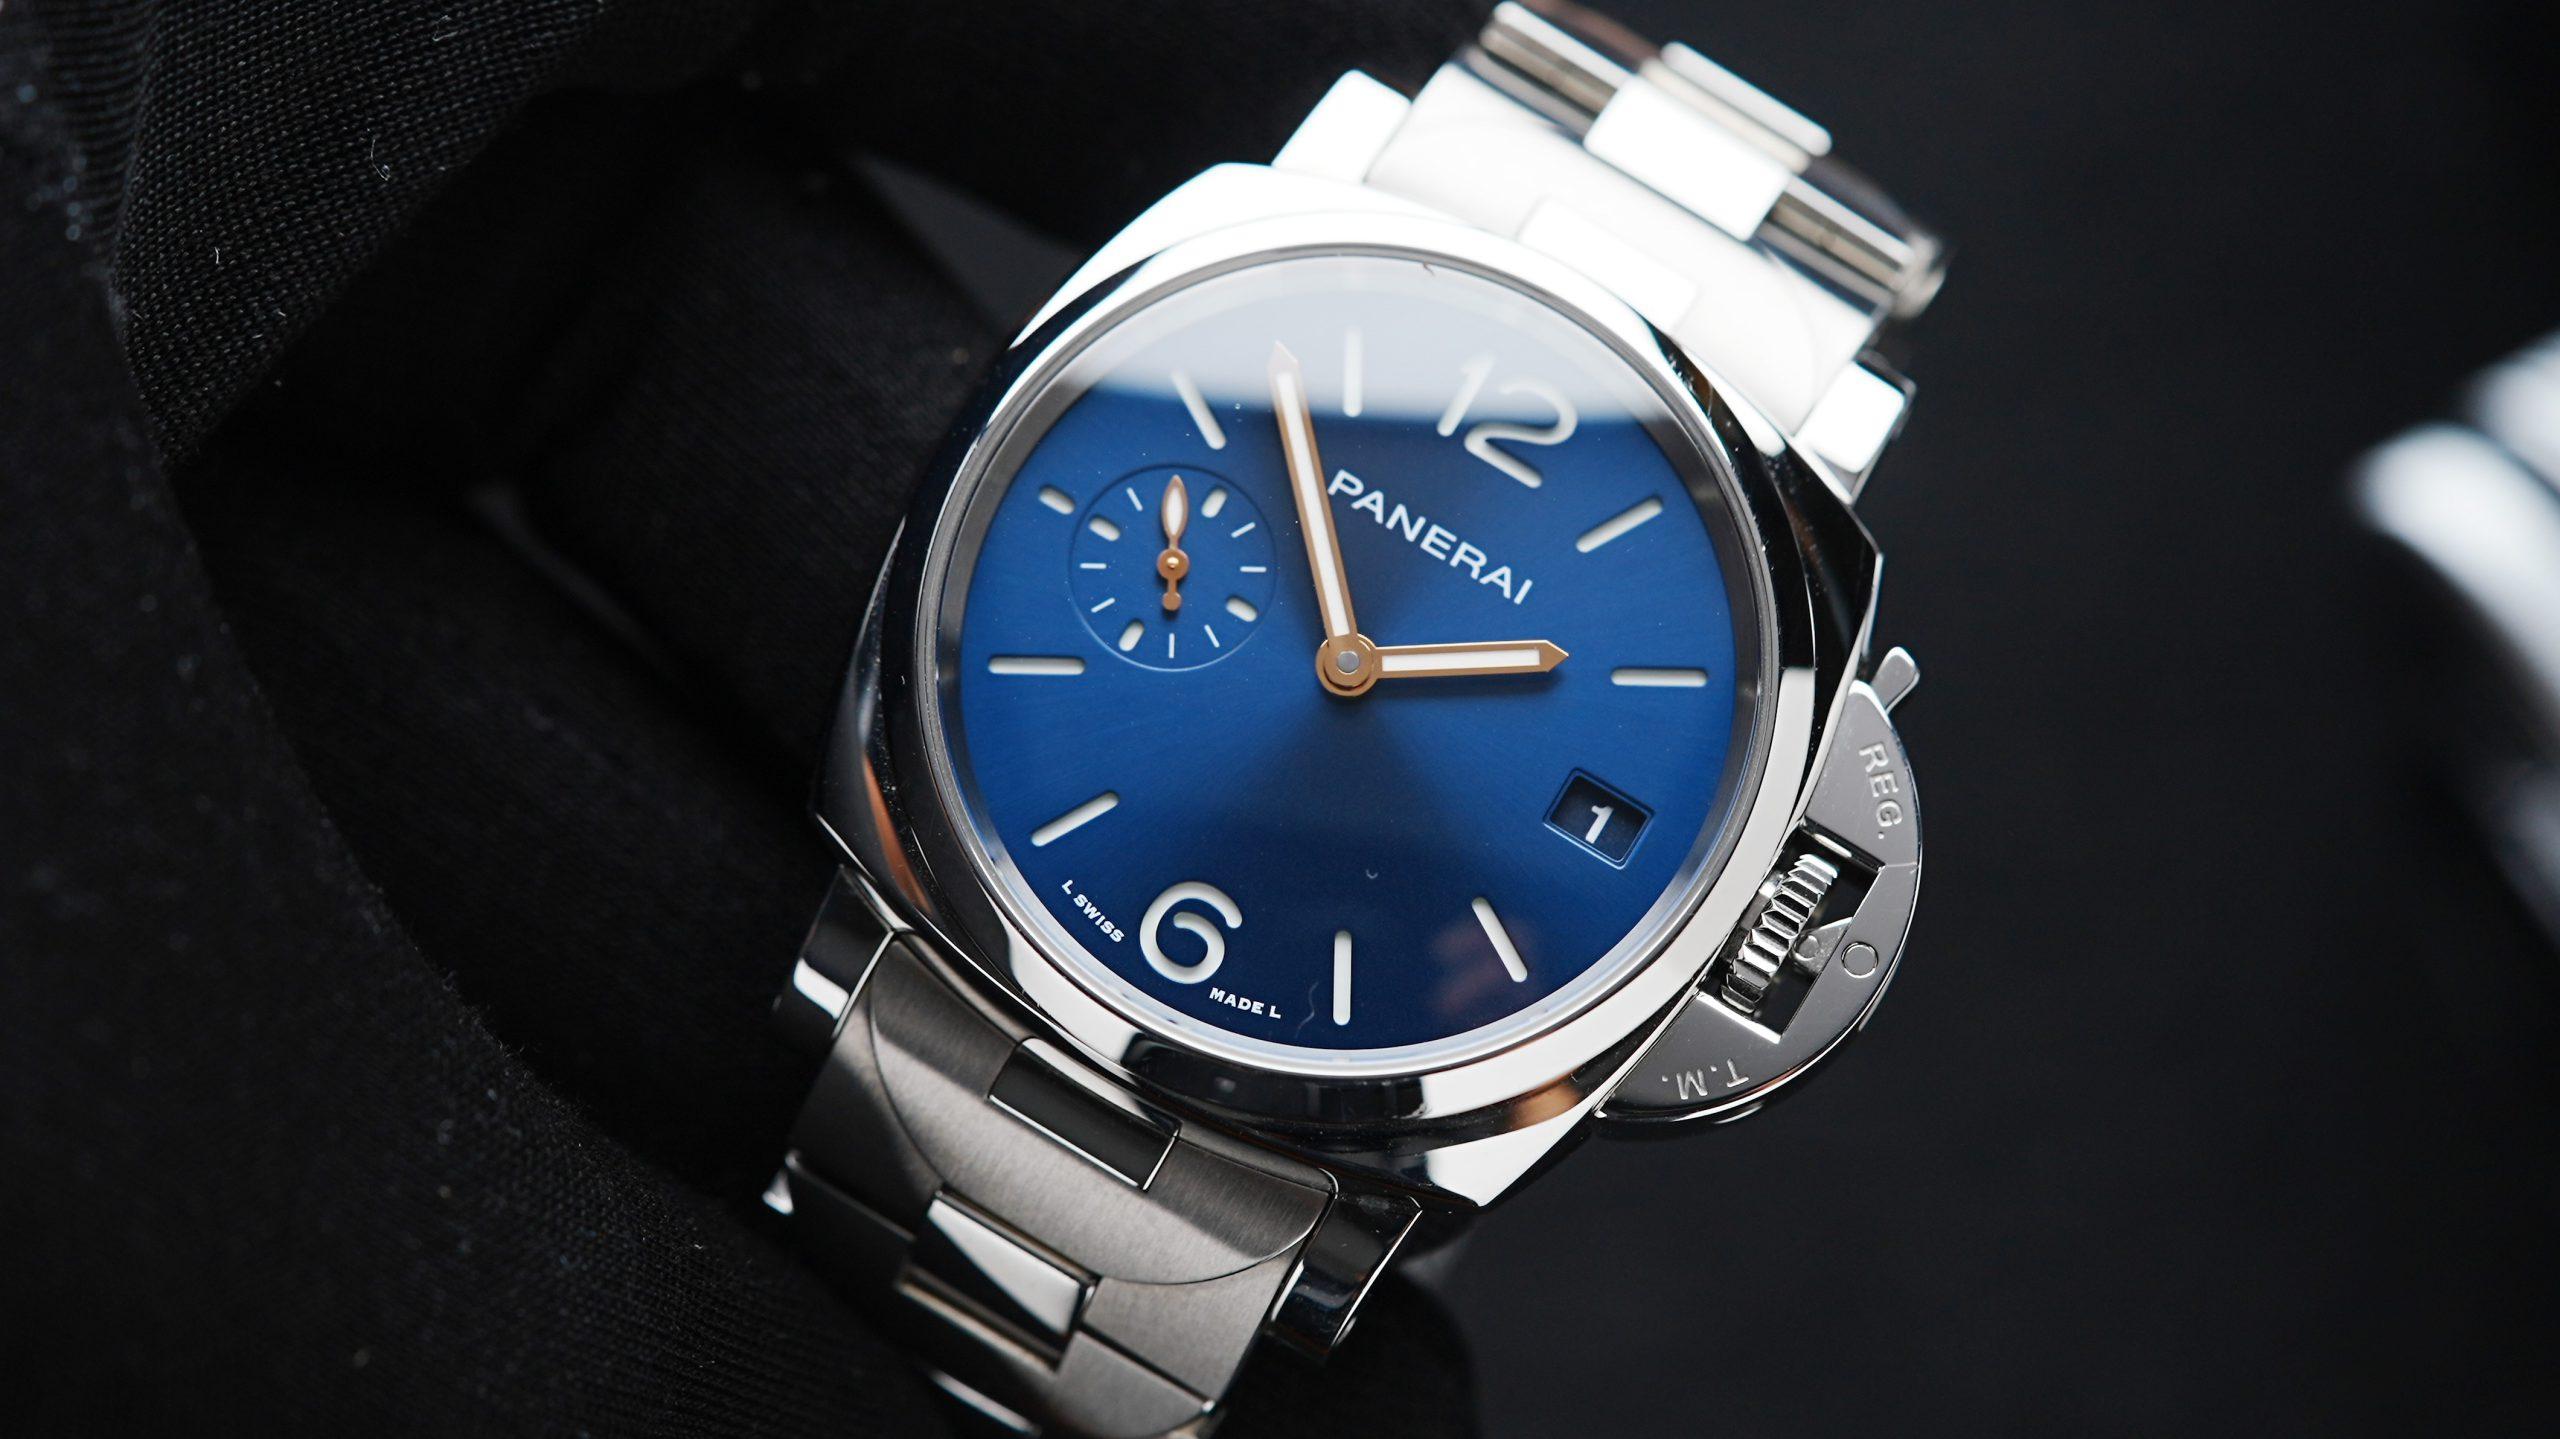 Panerai Luminor Due Pam01123 38mm up close picture of blue dial.